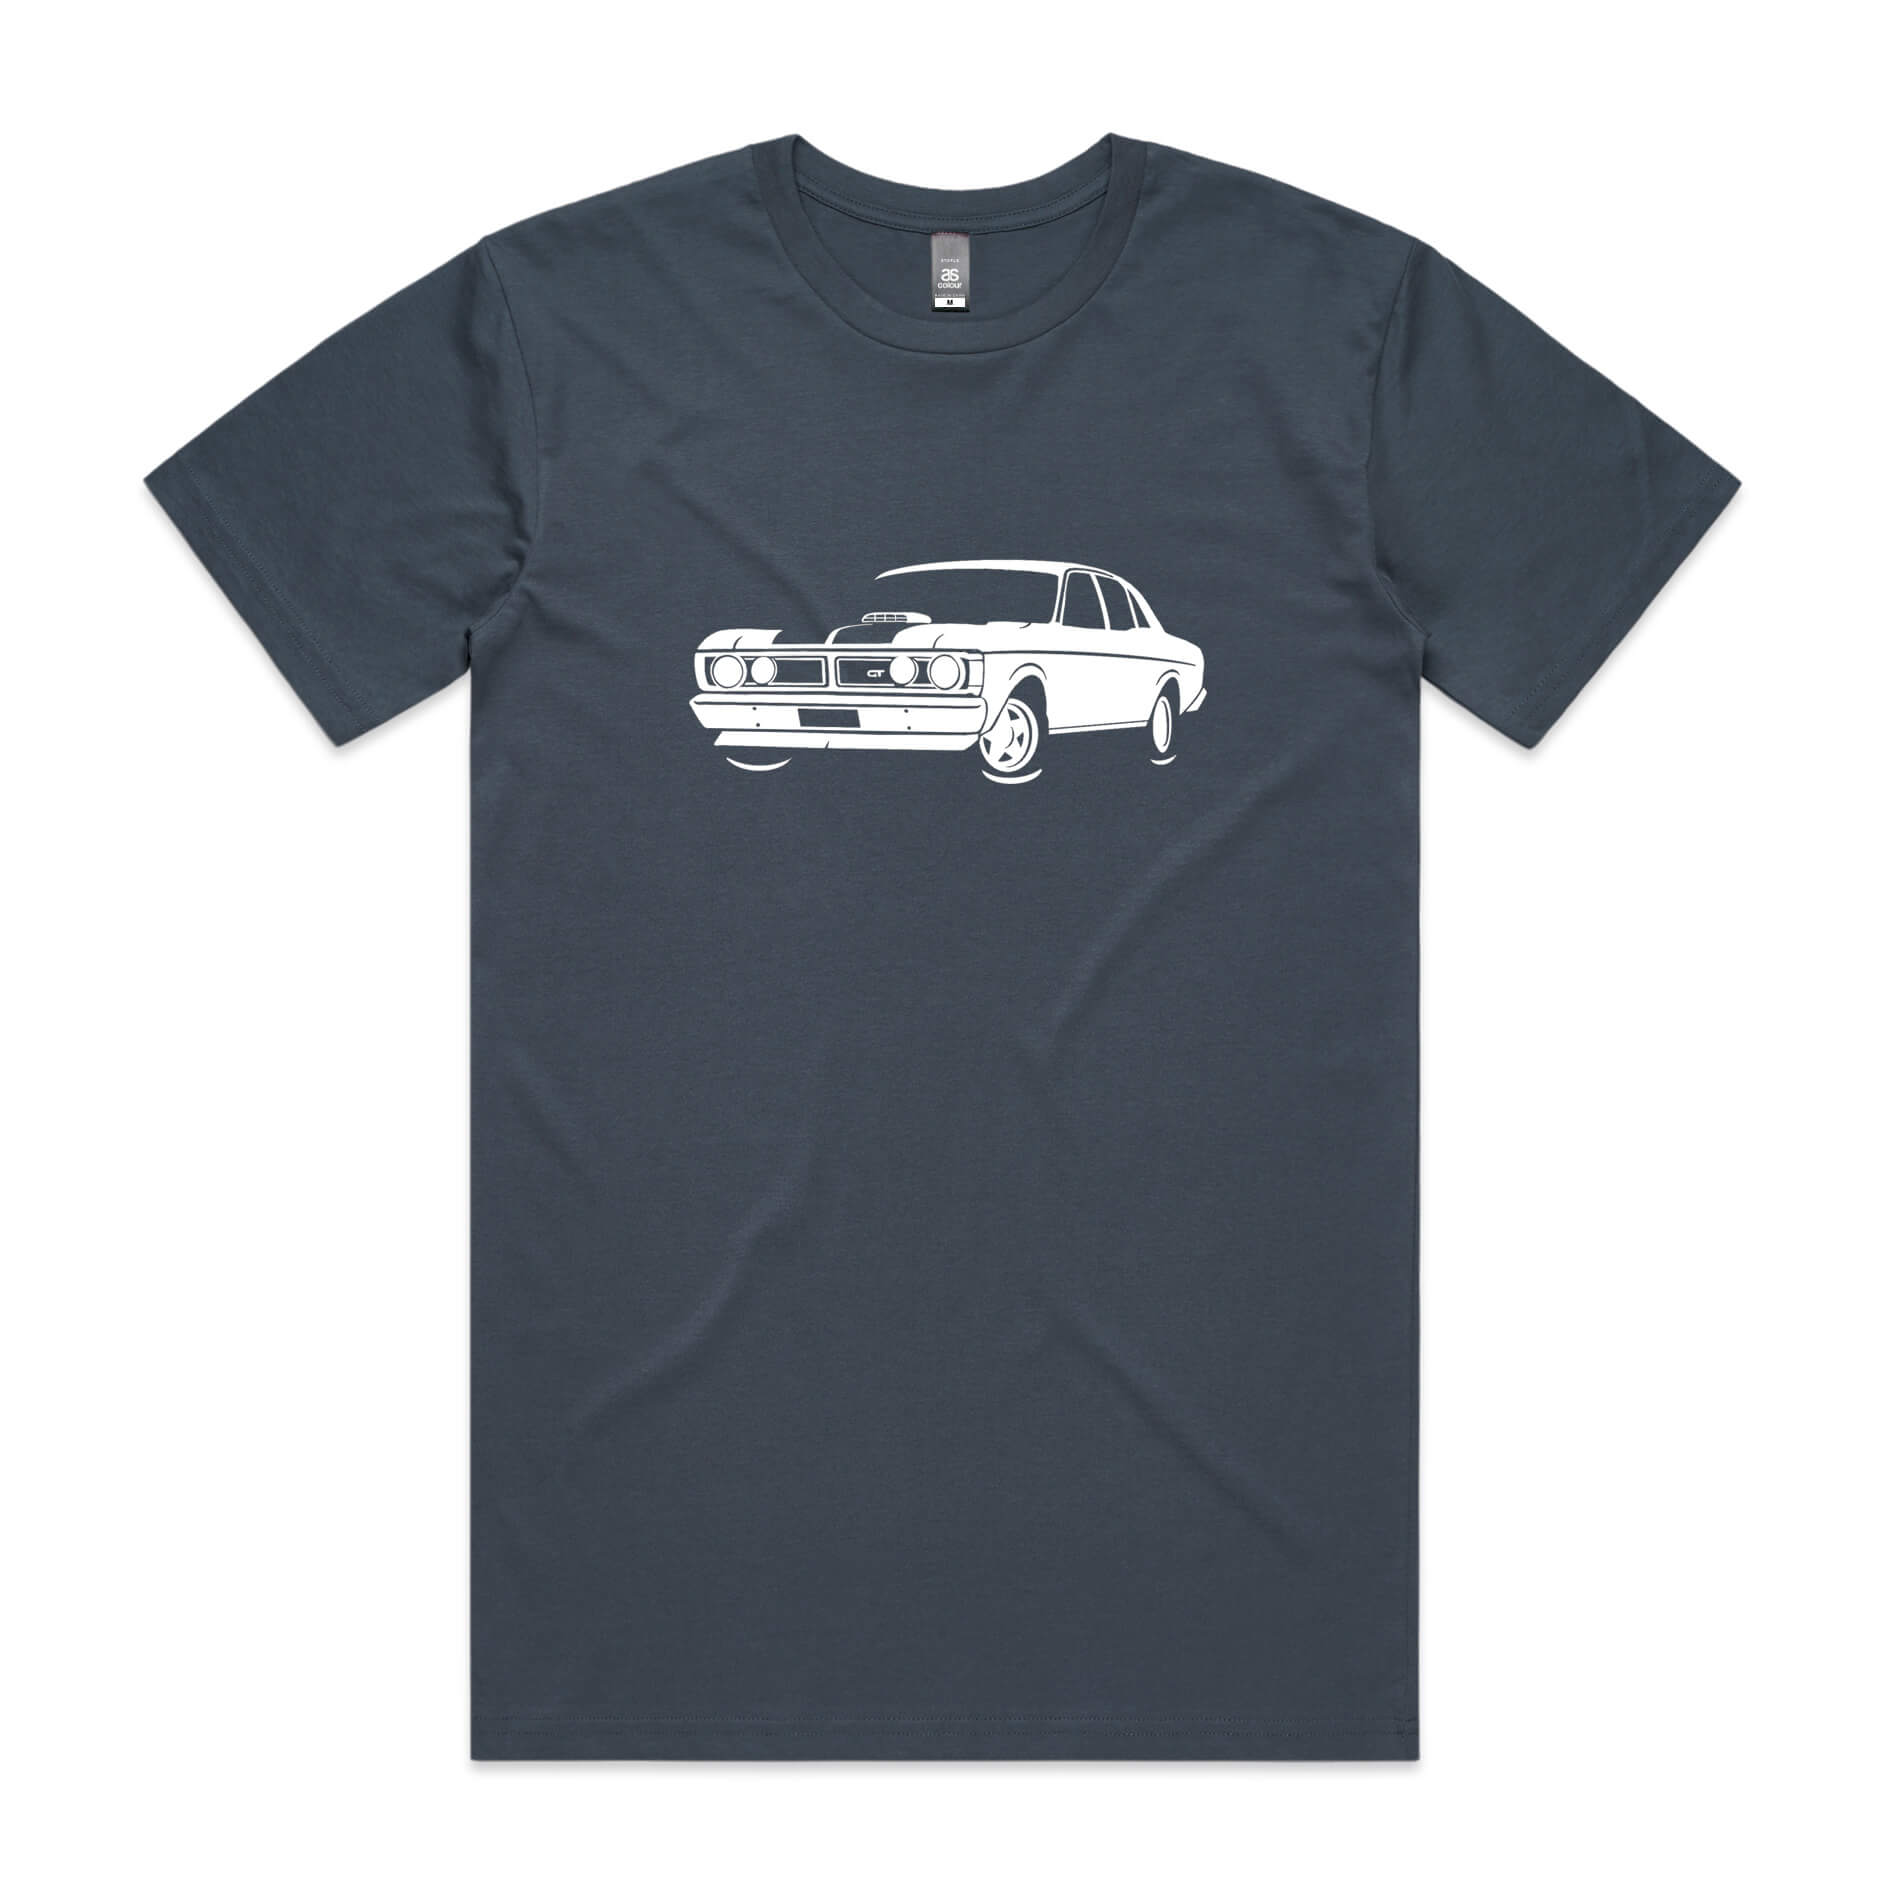 Ford XY Falcon t-shirt in petrol blue with white car graphic